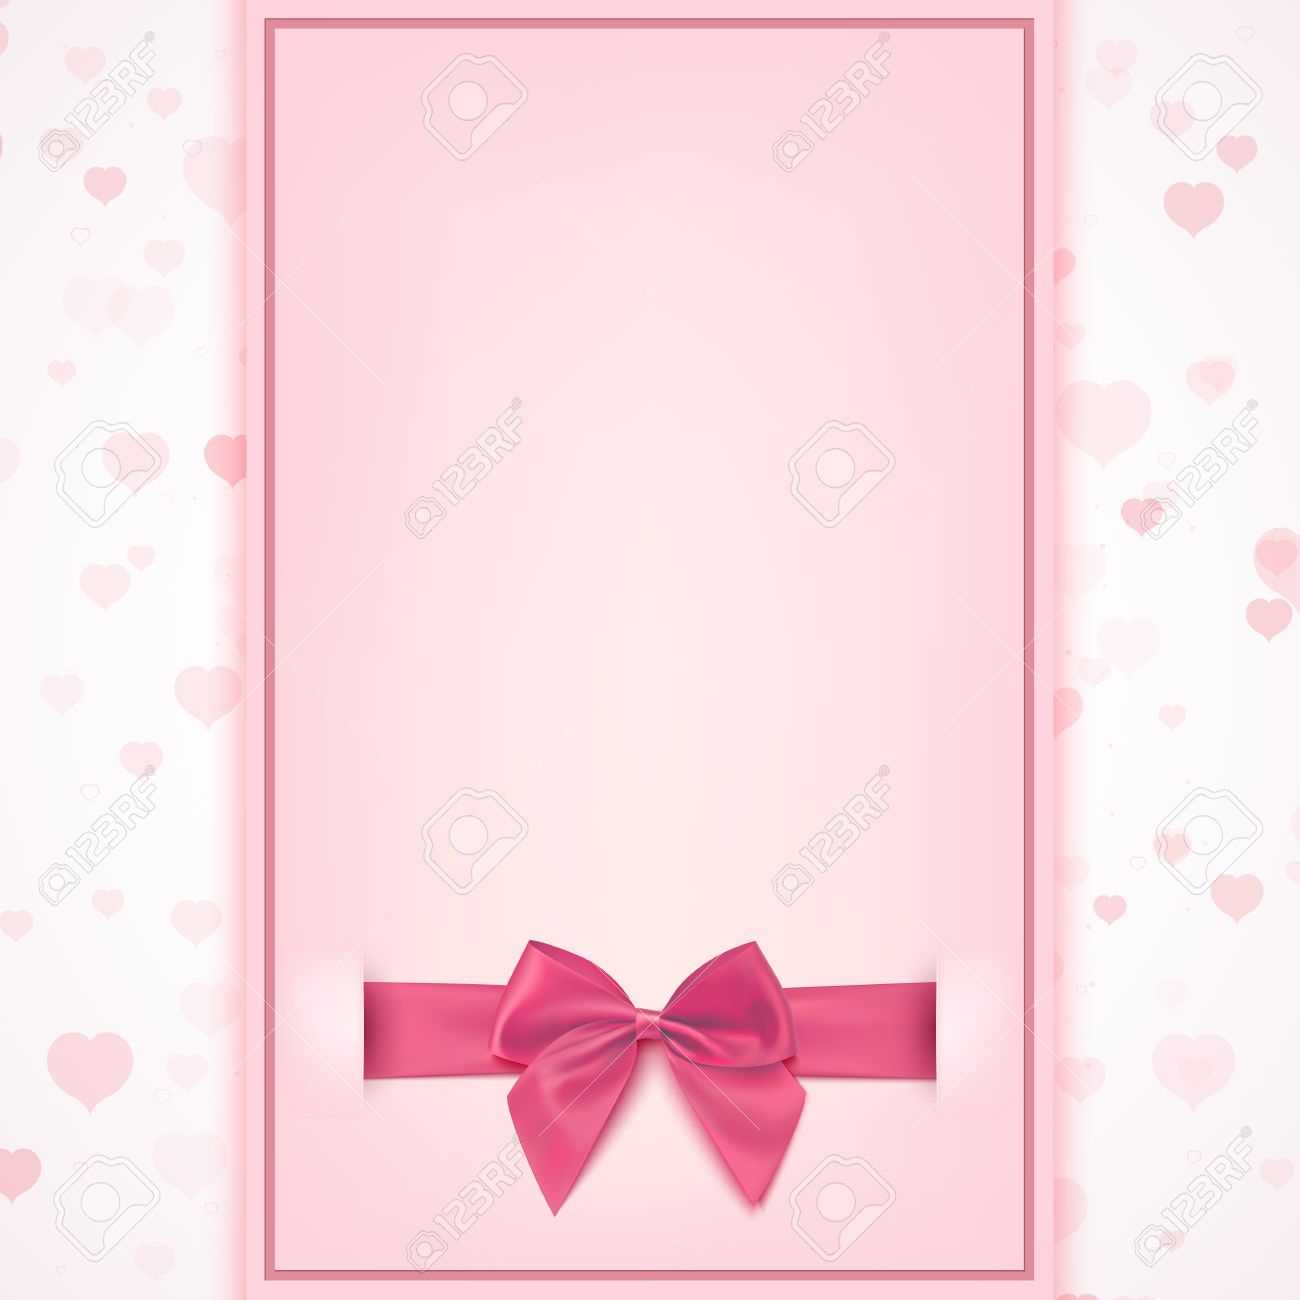 Blank Greeting Card Template For Baby Girl Shower Celebration,.. Intended For Free Printable Blank Greeting Card Templates